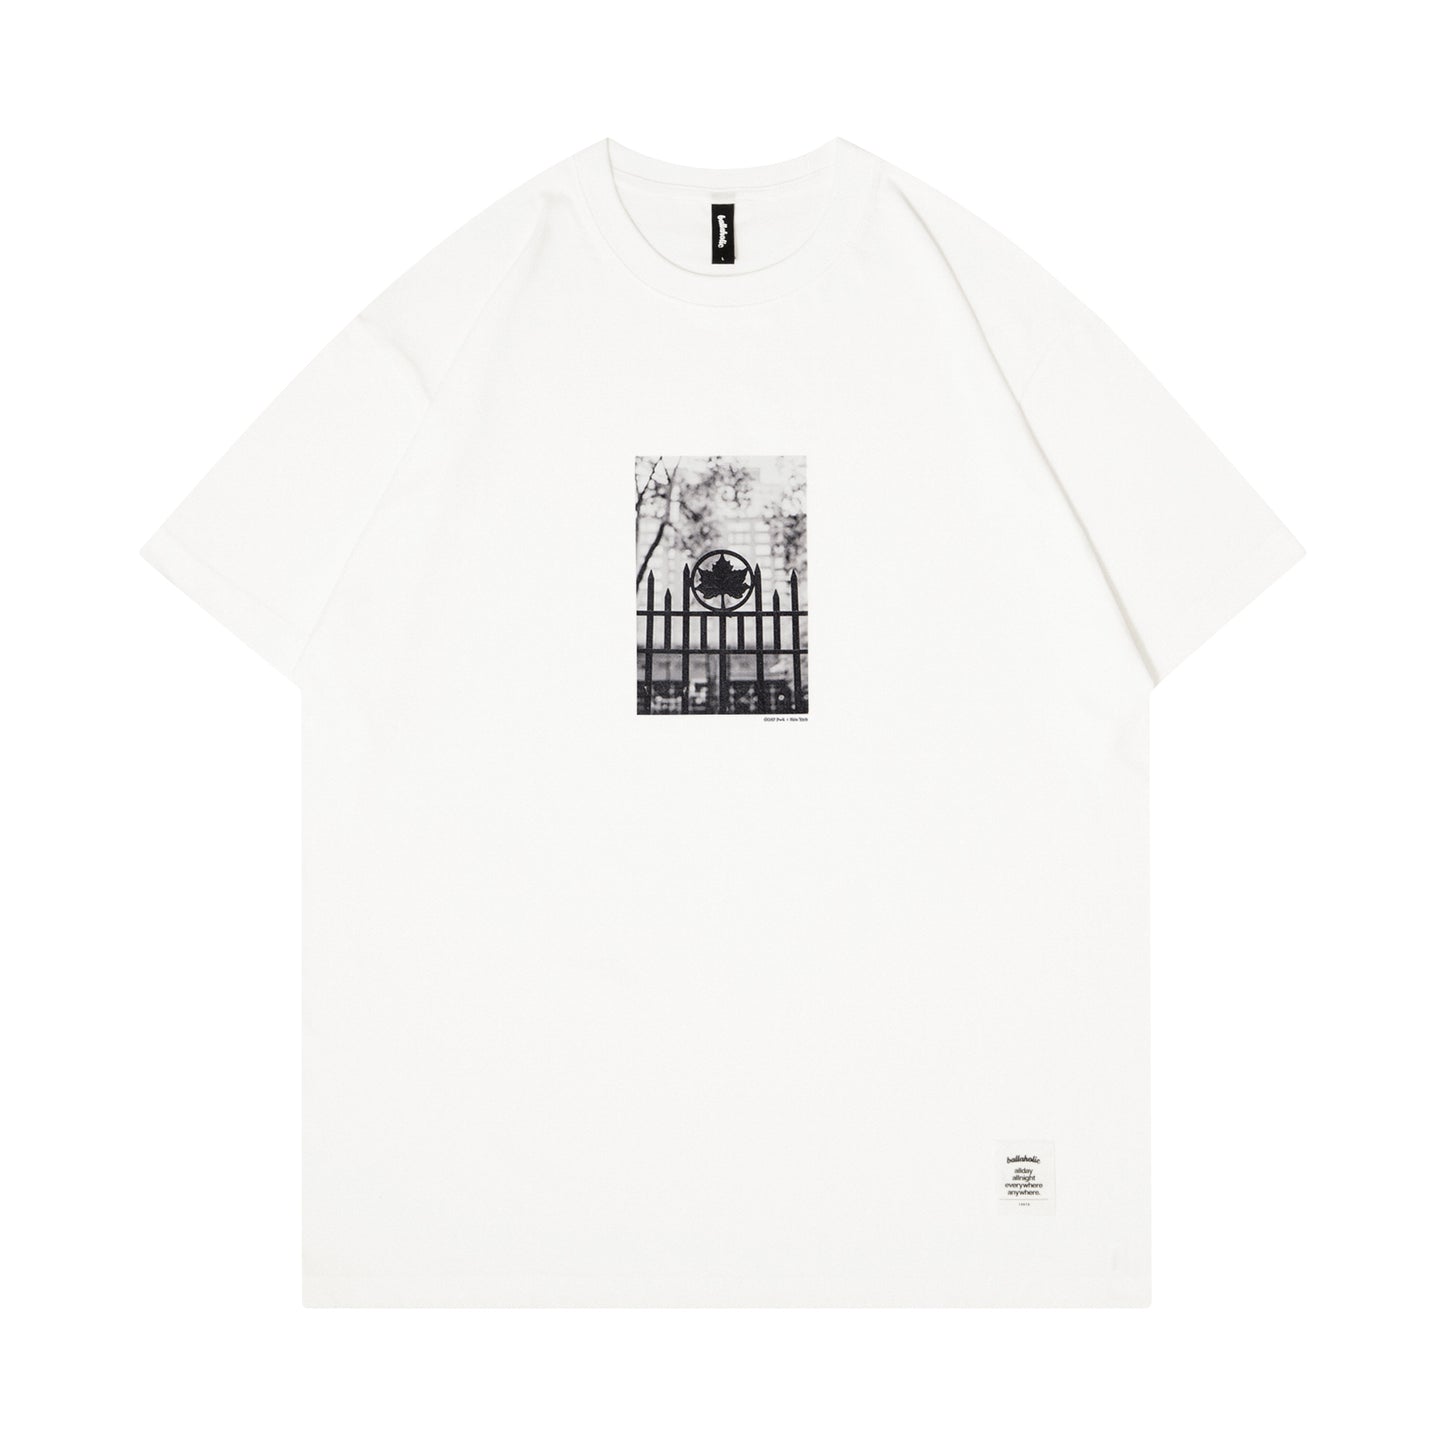 Photo Tee -The Parks Leaf- (white)